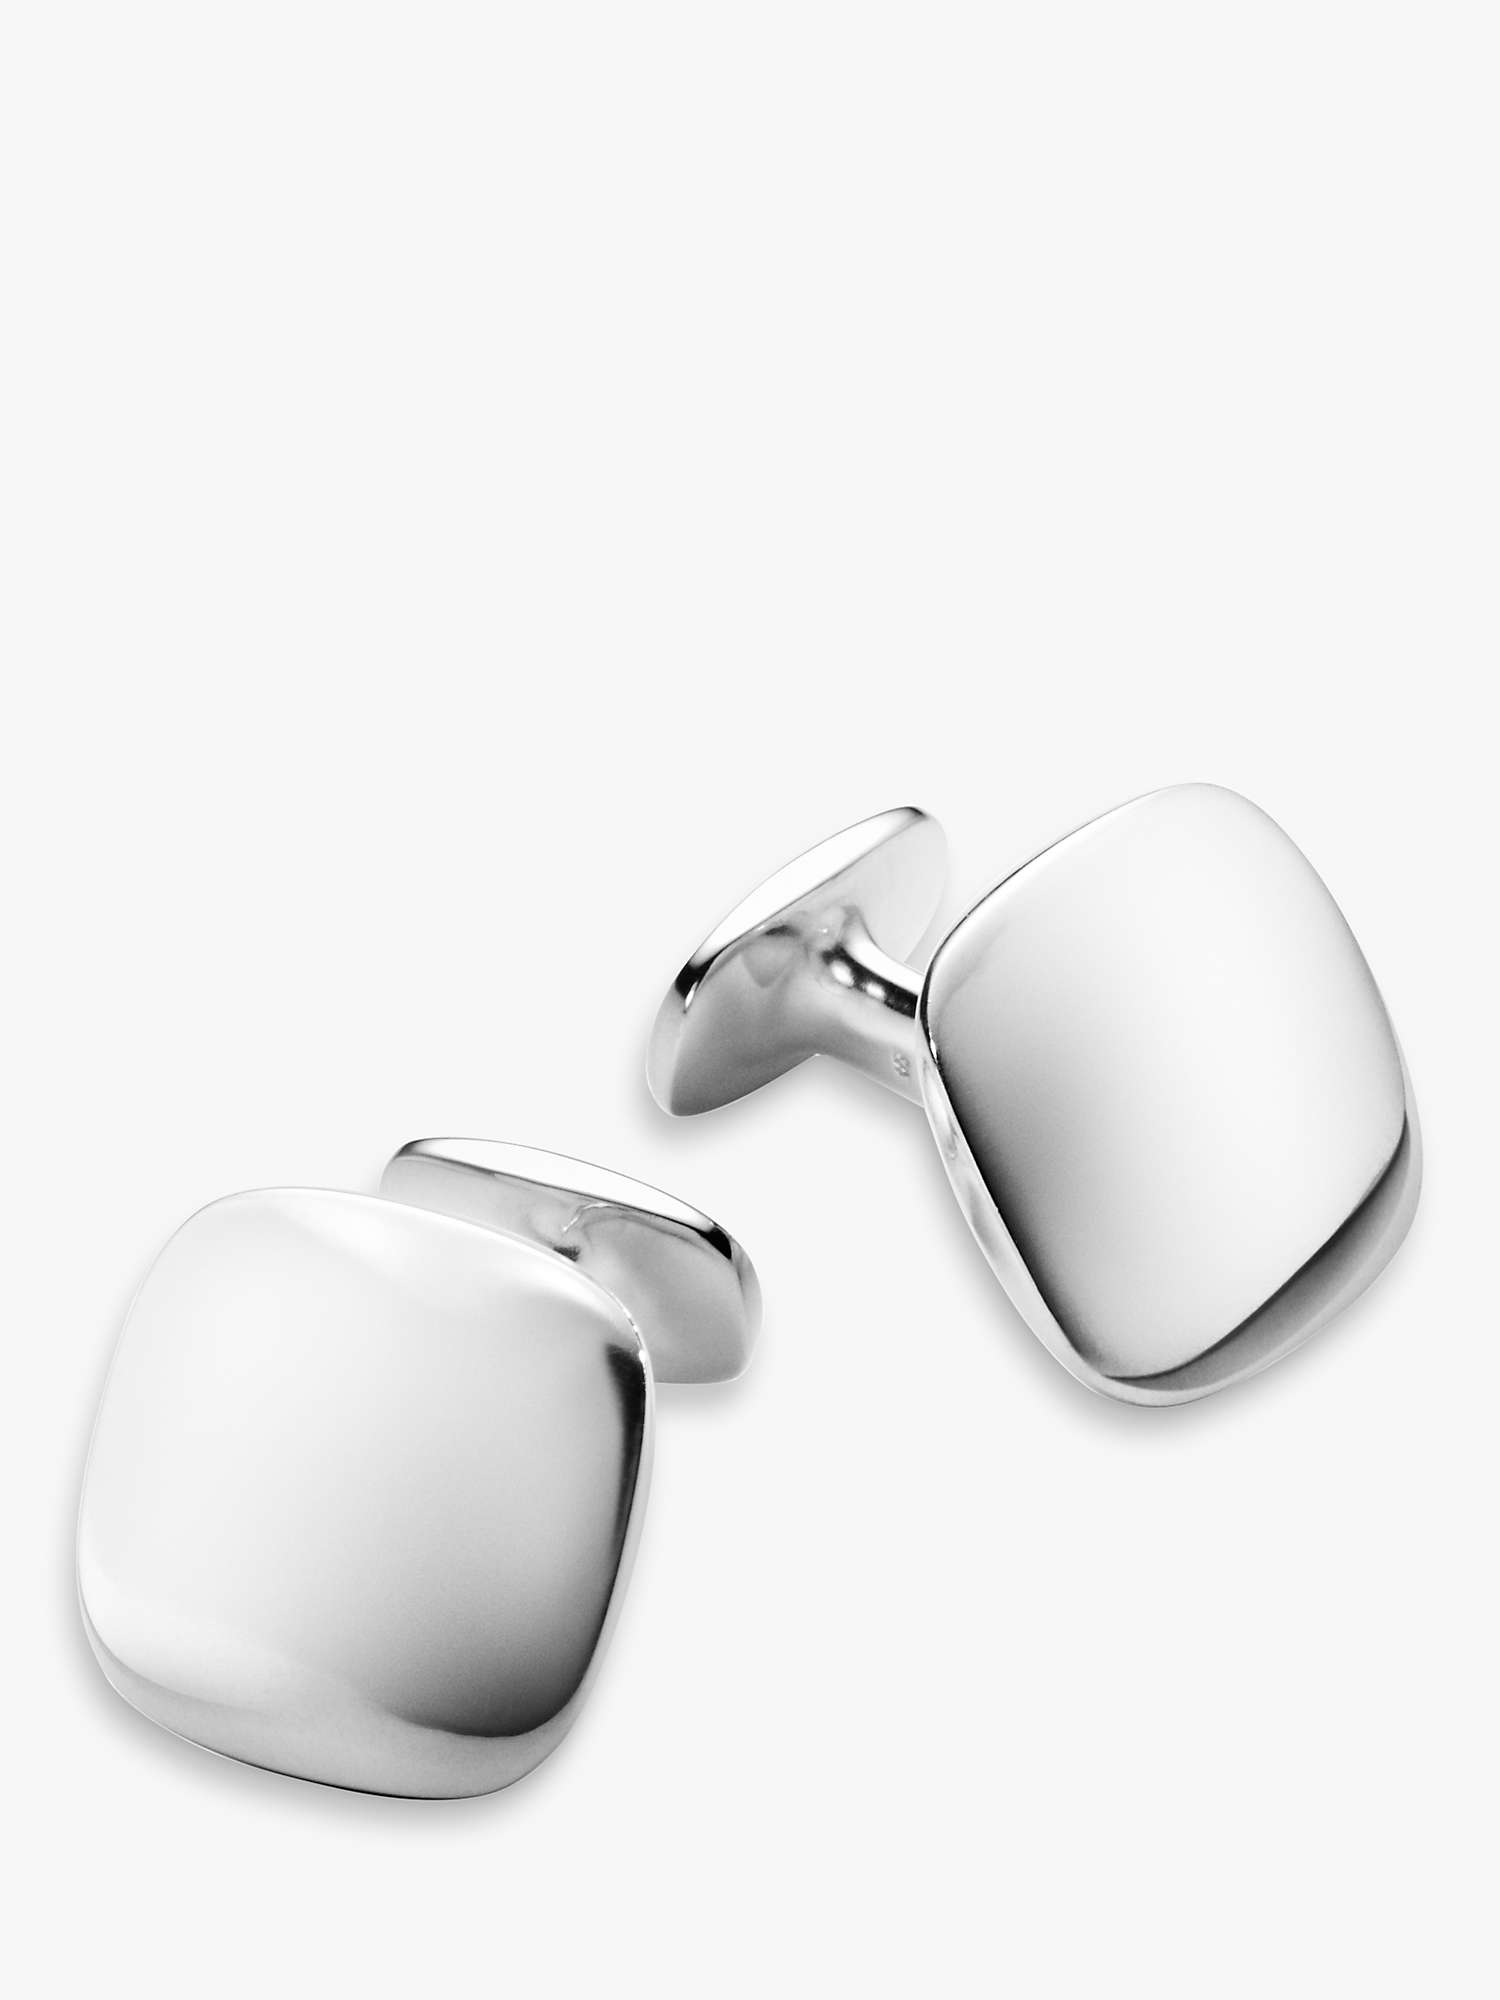 Buy Georg Jensen Rounded Square Cufflinks, Silver Online at johnlewis.com